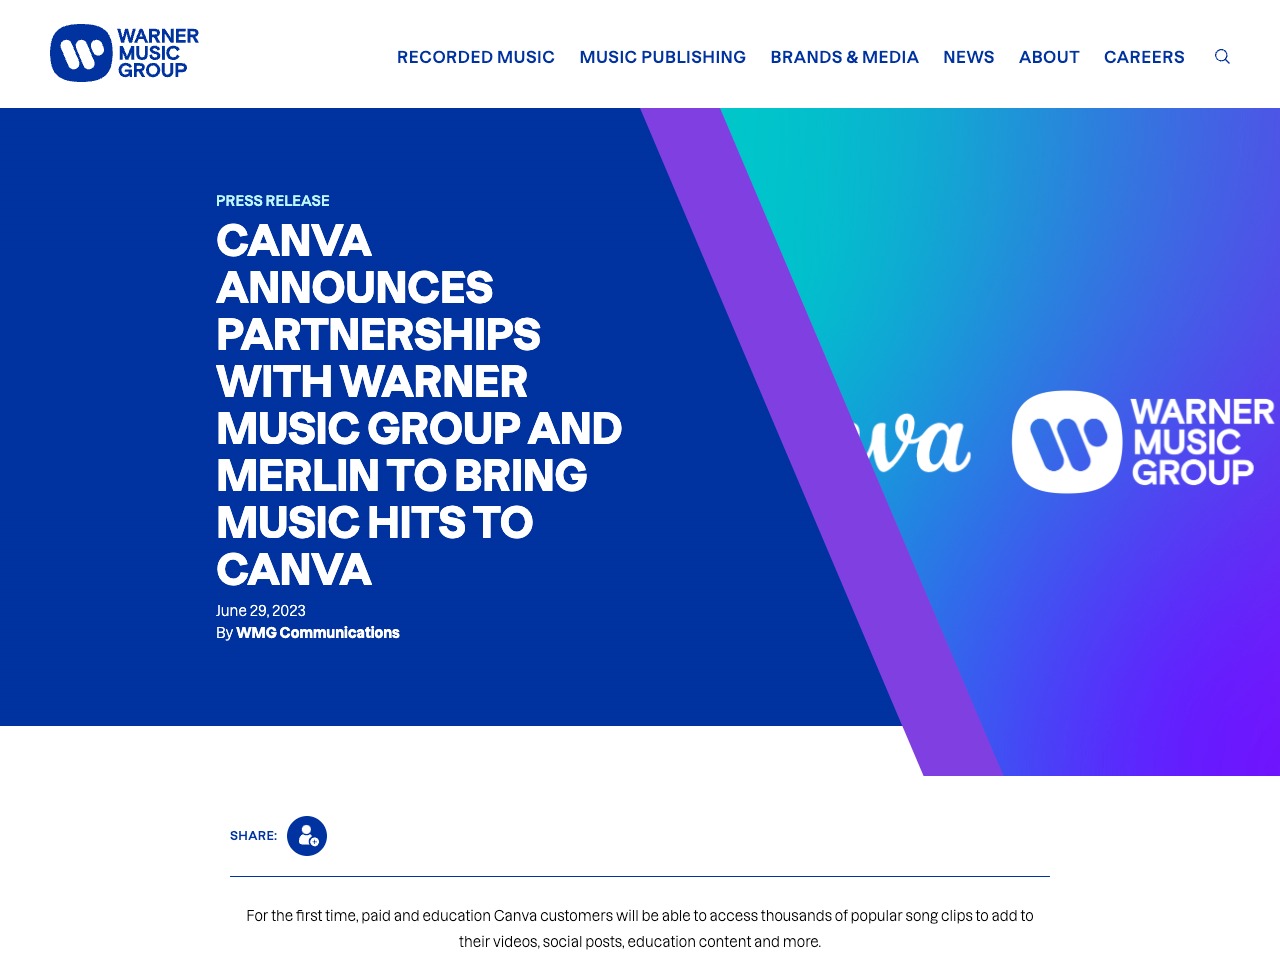 CANVA ANNOUNCES PARTNERSHIPS WITH WARNER MUSIC GROUP AND MERLIN TO BRING MUSIC HITS TO CANVA - Warner Music Group